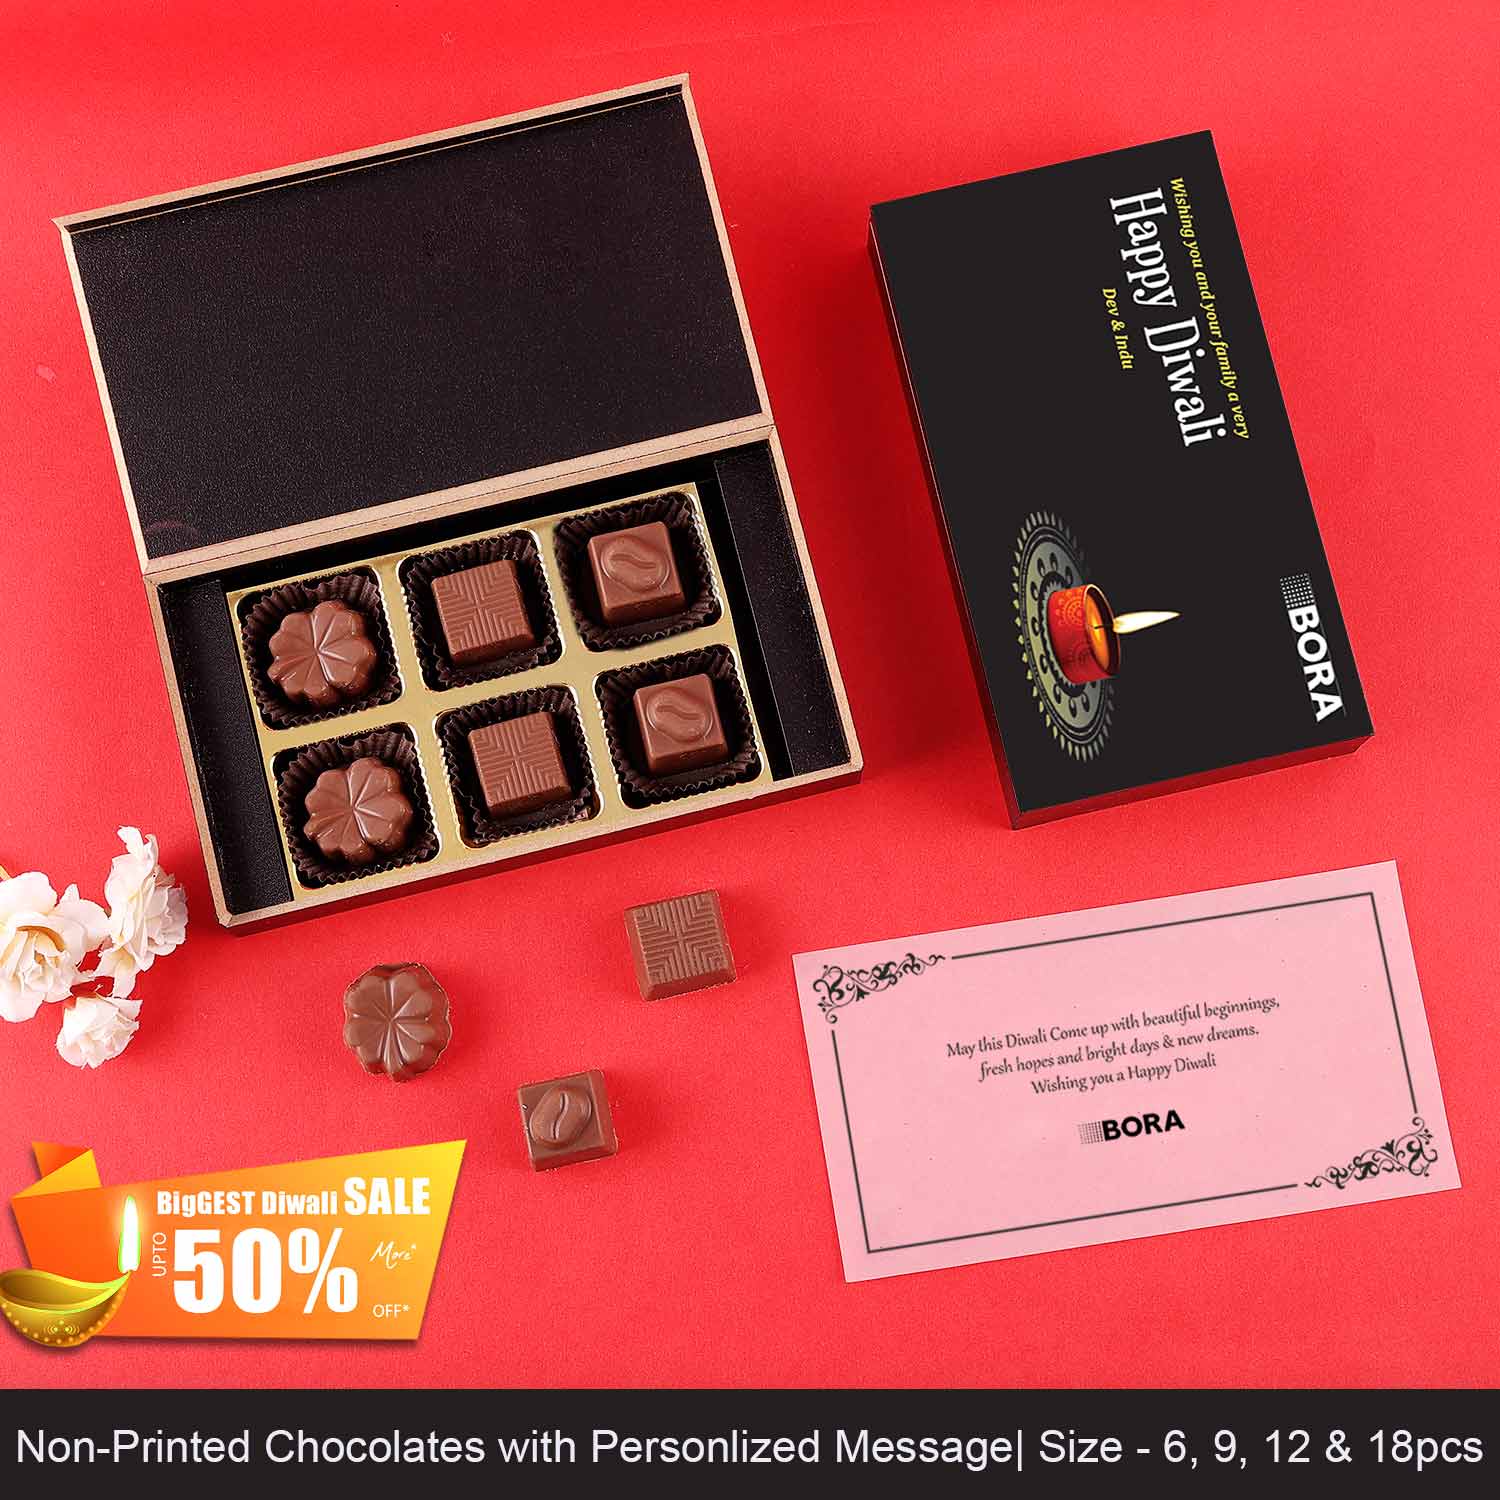 Chocolate with photo printed on it handmade chocolate boc online personalised chocolate message corporate chocolate gidt boxes